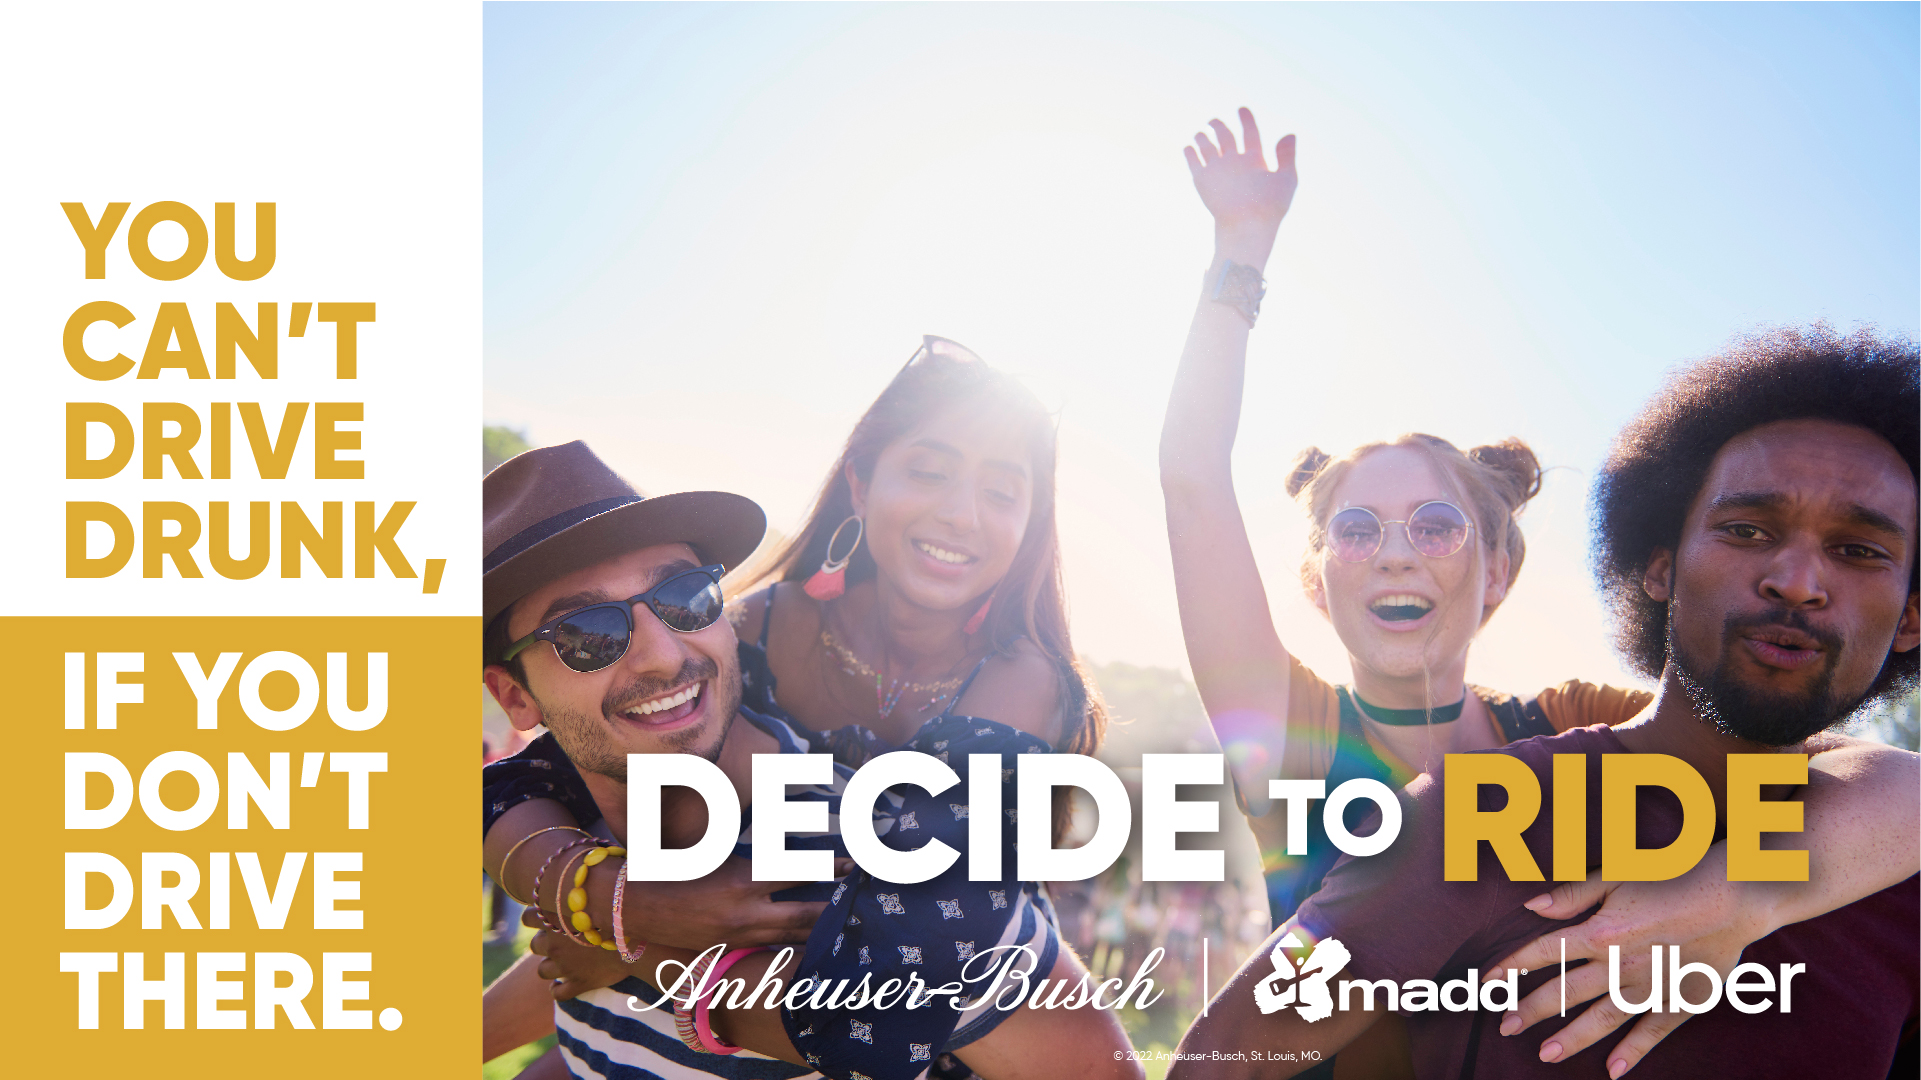 Anheuser-Busch, MADD and Uber Partner to Help Prevent Drunk Driving in Cincinnati This Labor Day Through the Decide to Ride Campaign